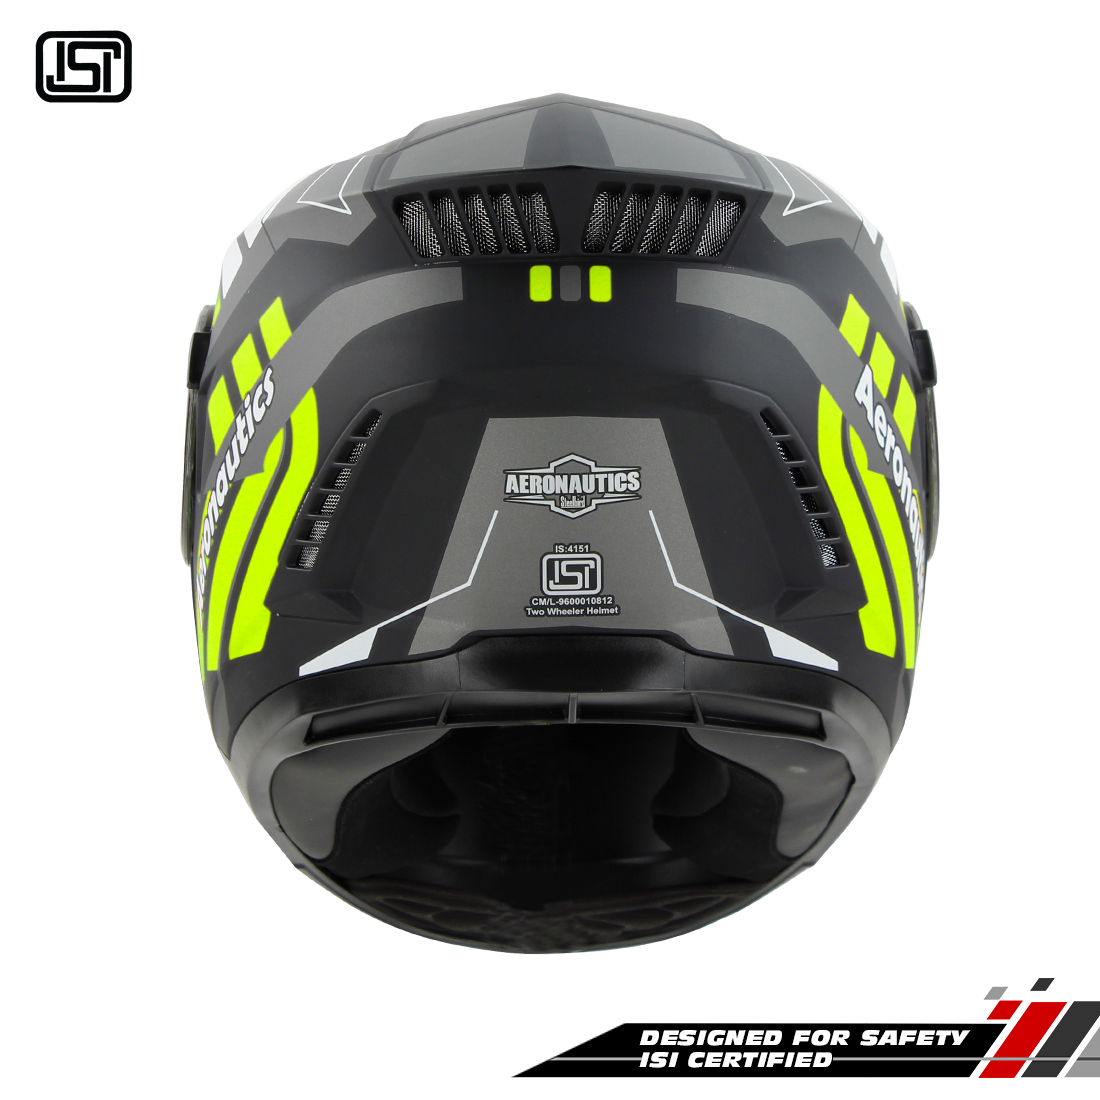 Steelbird SBH-40 Vanguard ISI Certified Full Face Graphic Helmet For Men And Women With Inner Sun Shield (Glossy Black Neon)